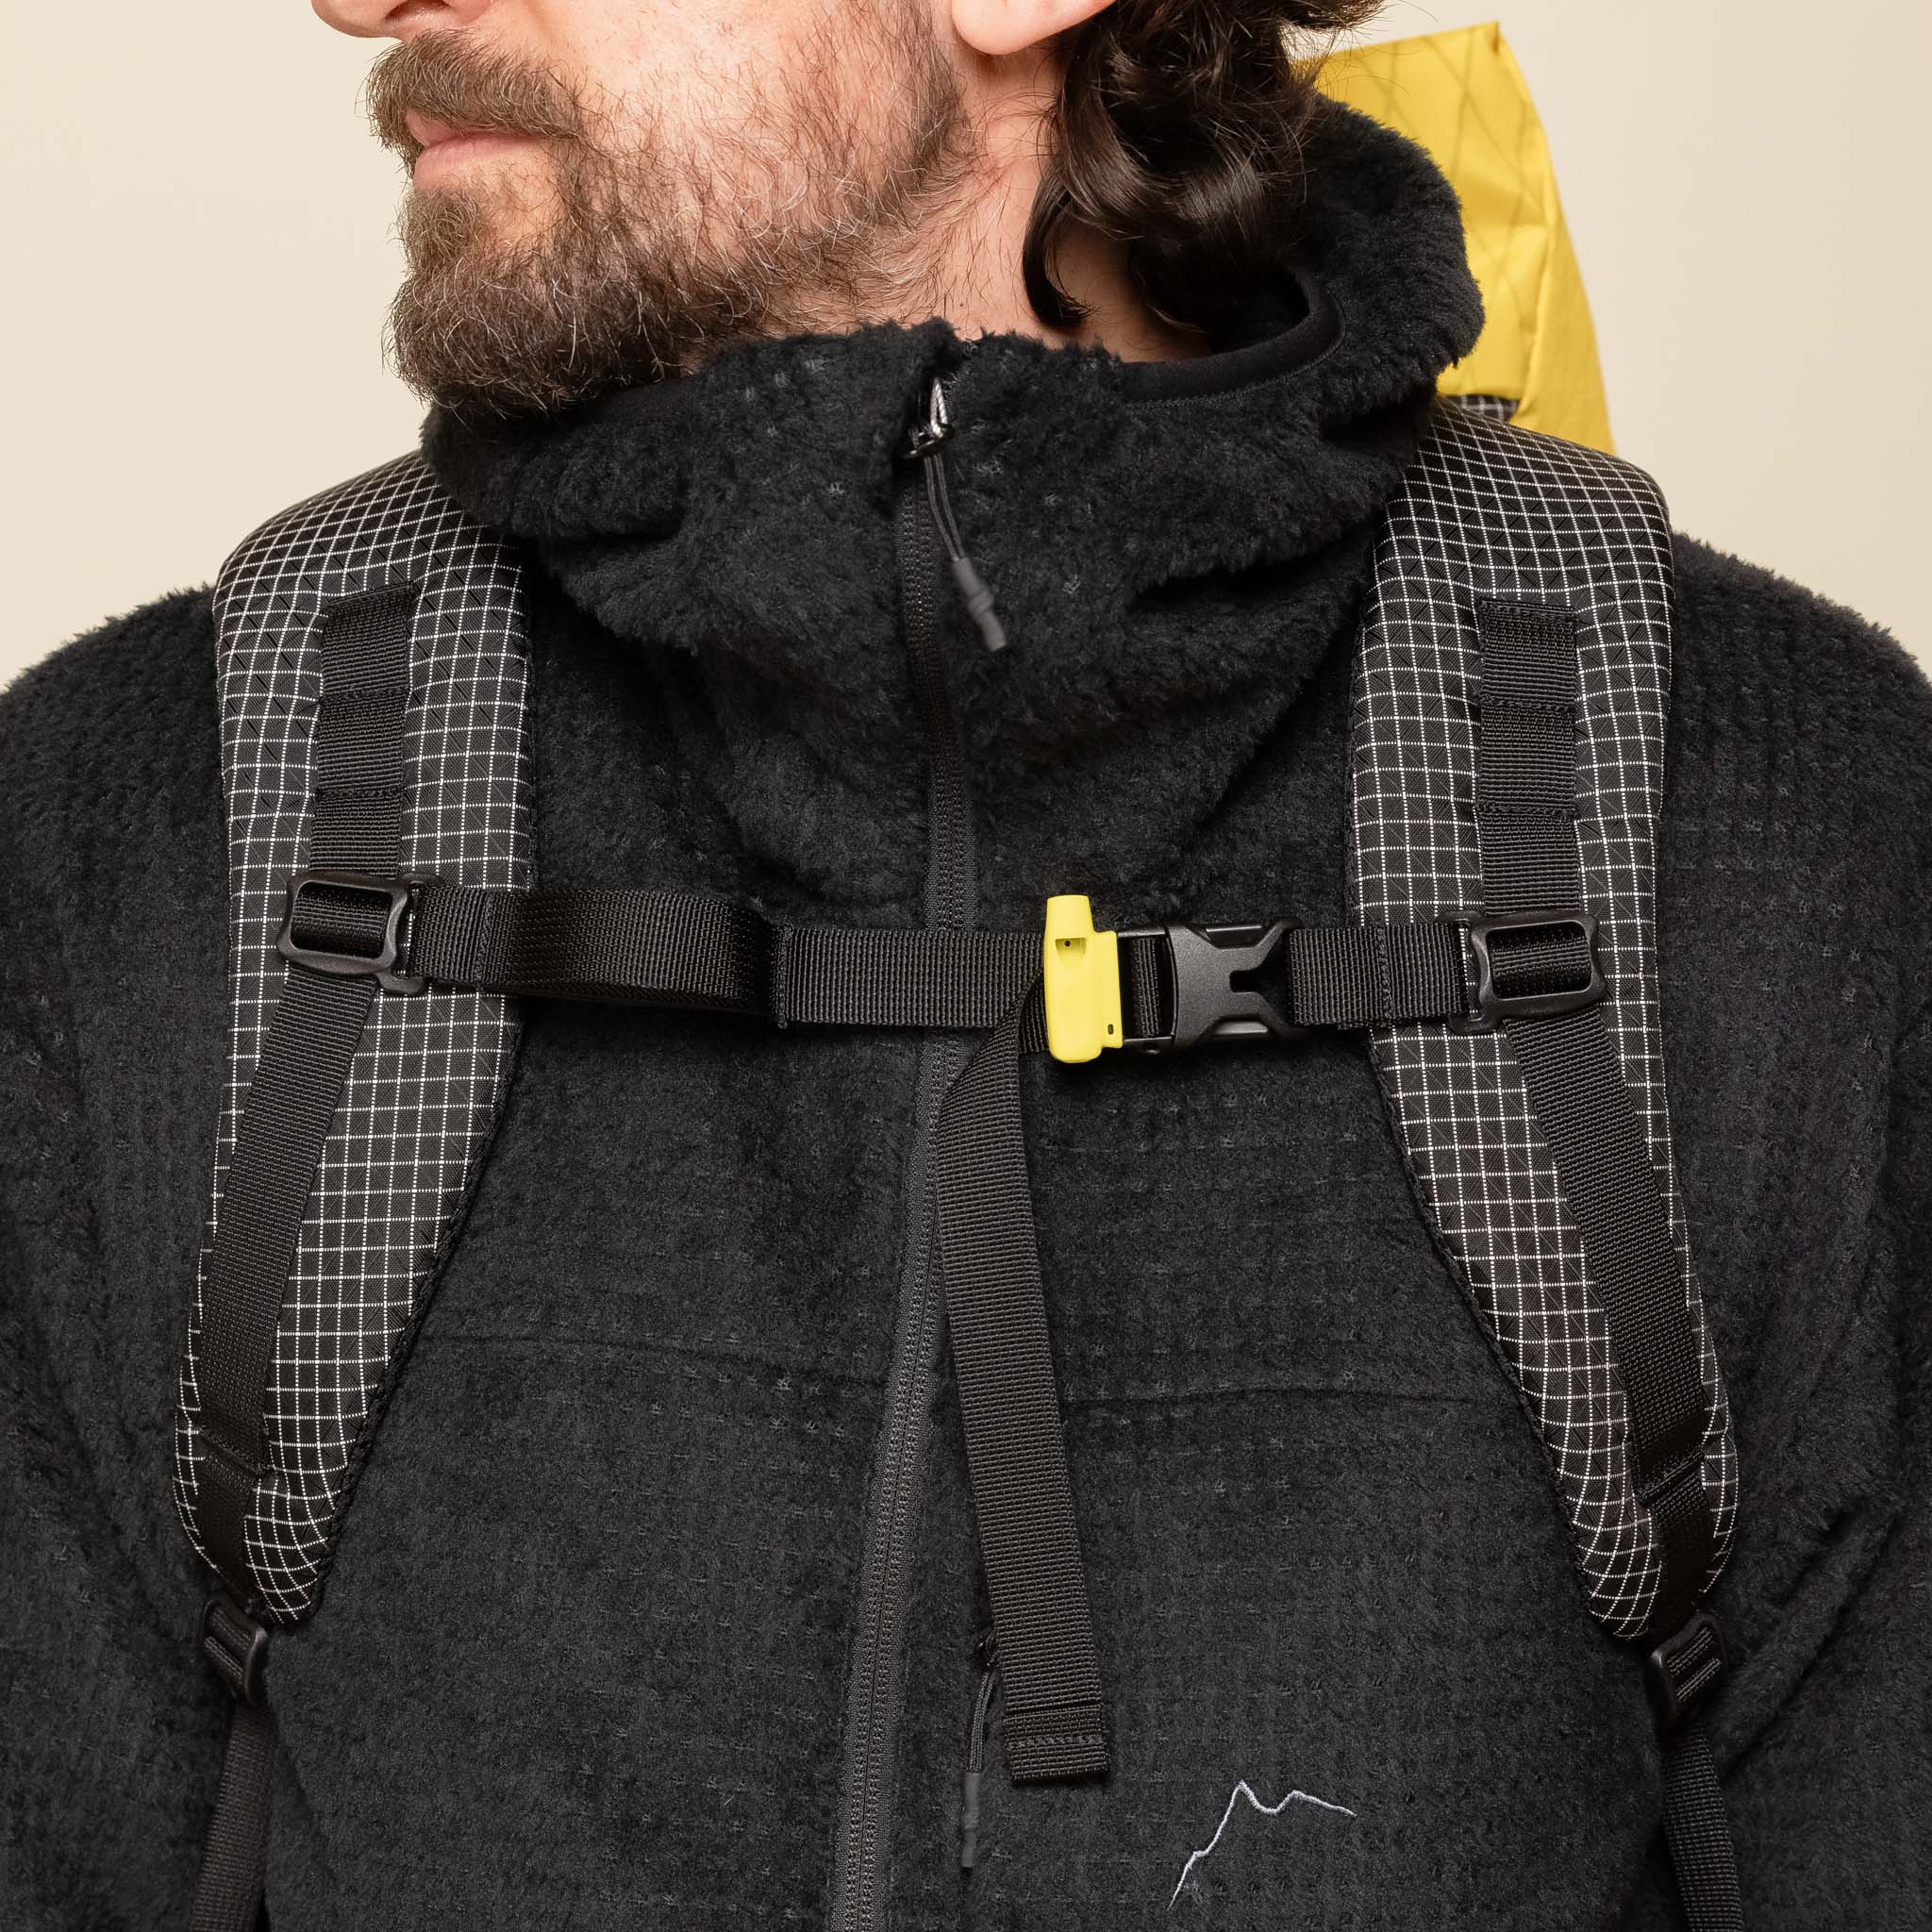 CAYL "Climb As You Love" - Mari Roll Top Backpack - Yellow X-Pac "cayl stockists" "cayl backpack" "climb as you love"